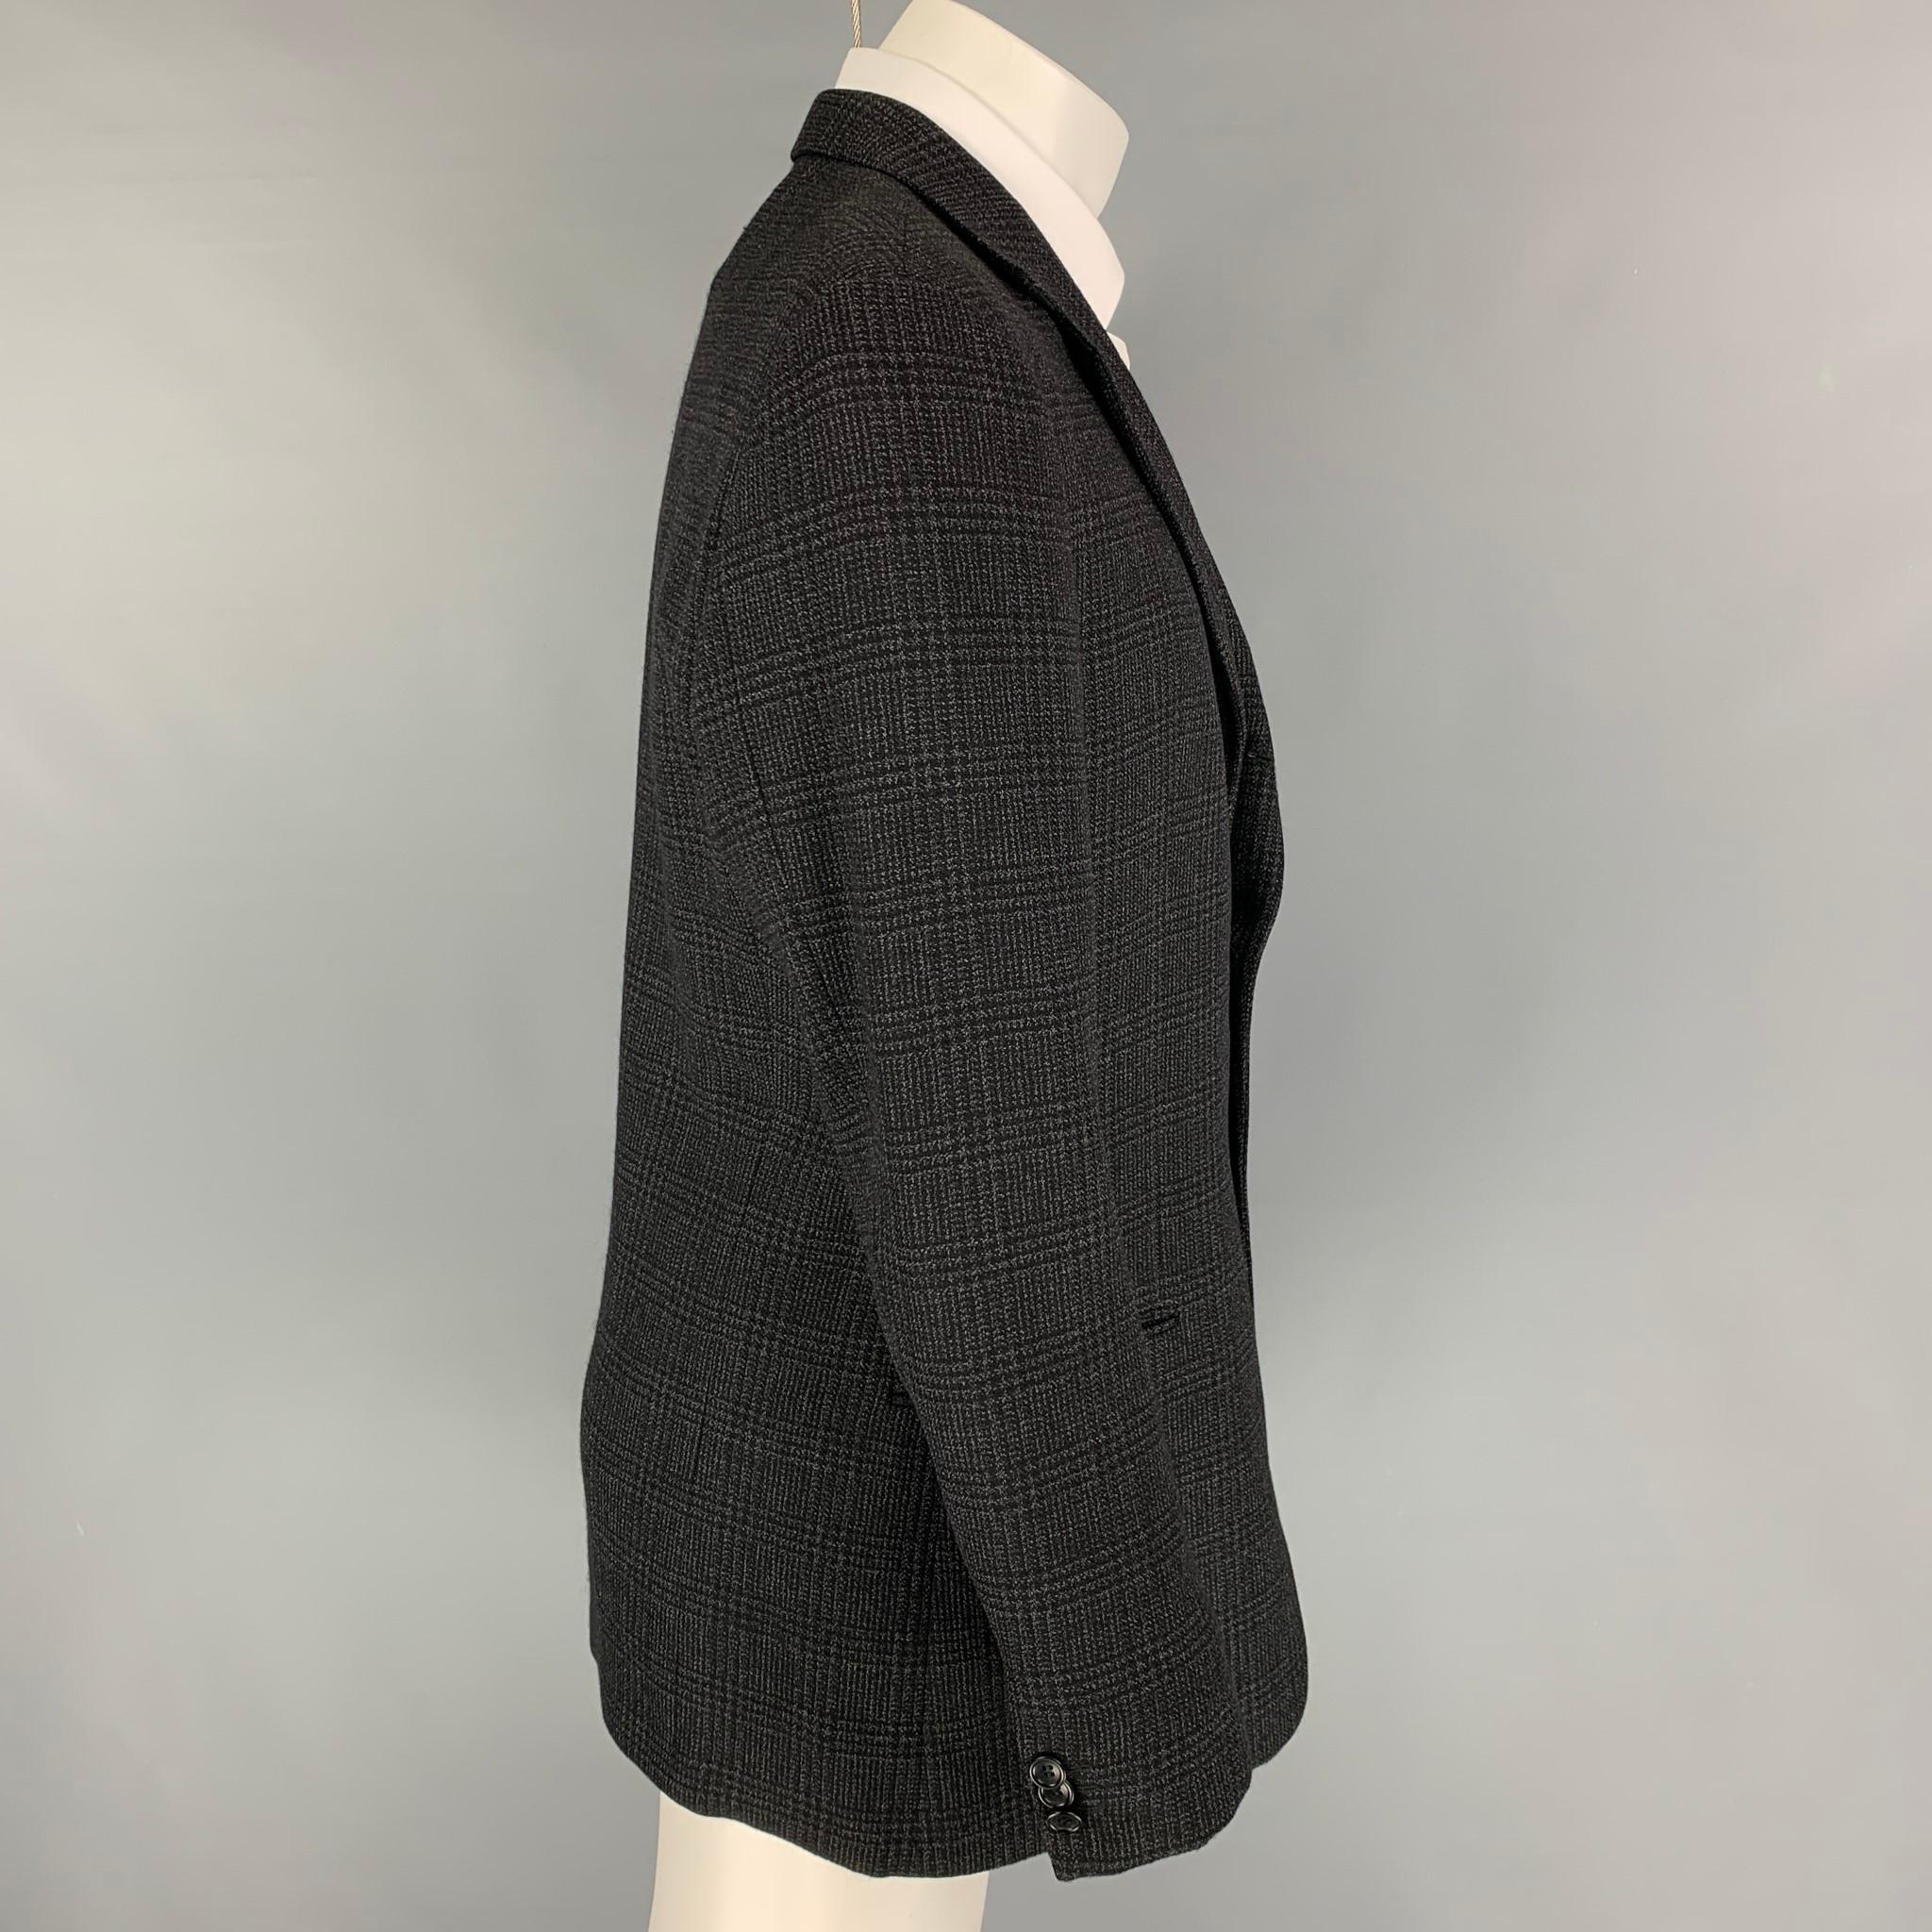 ARMANI COLLEZIONI sport coat comes in a charcoal & black plaid wool with a full liner featuring a notch lapel, slit pockets, and a double button closure. 

Very Good Pre-Owned Condition.
Marked: 40

Measurements:

Shoulder: 19 in.
Chest: 40